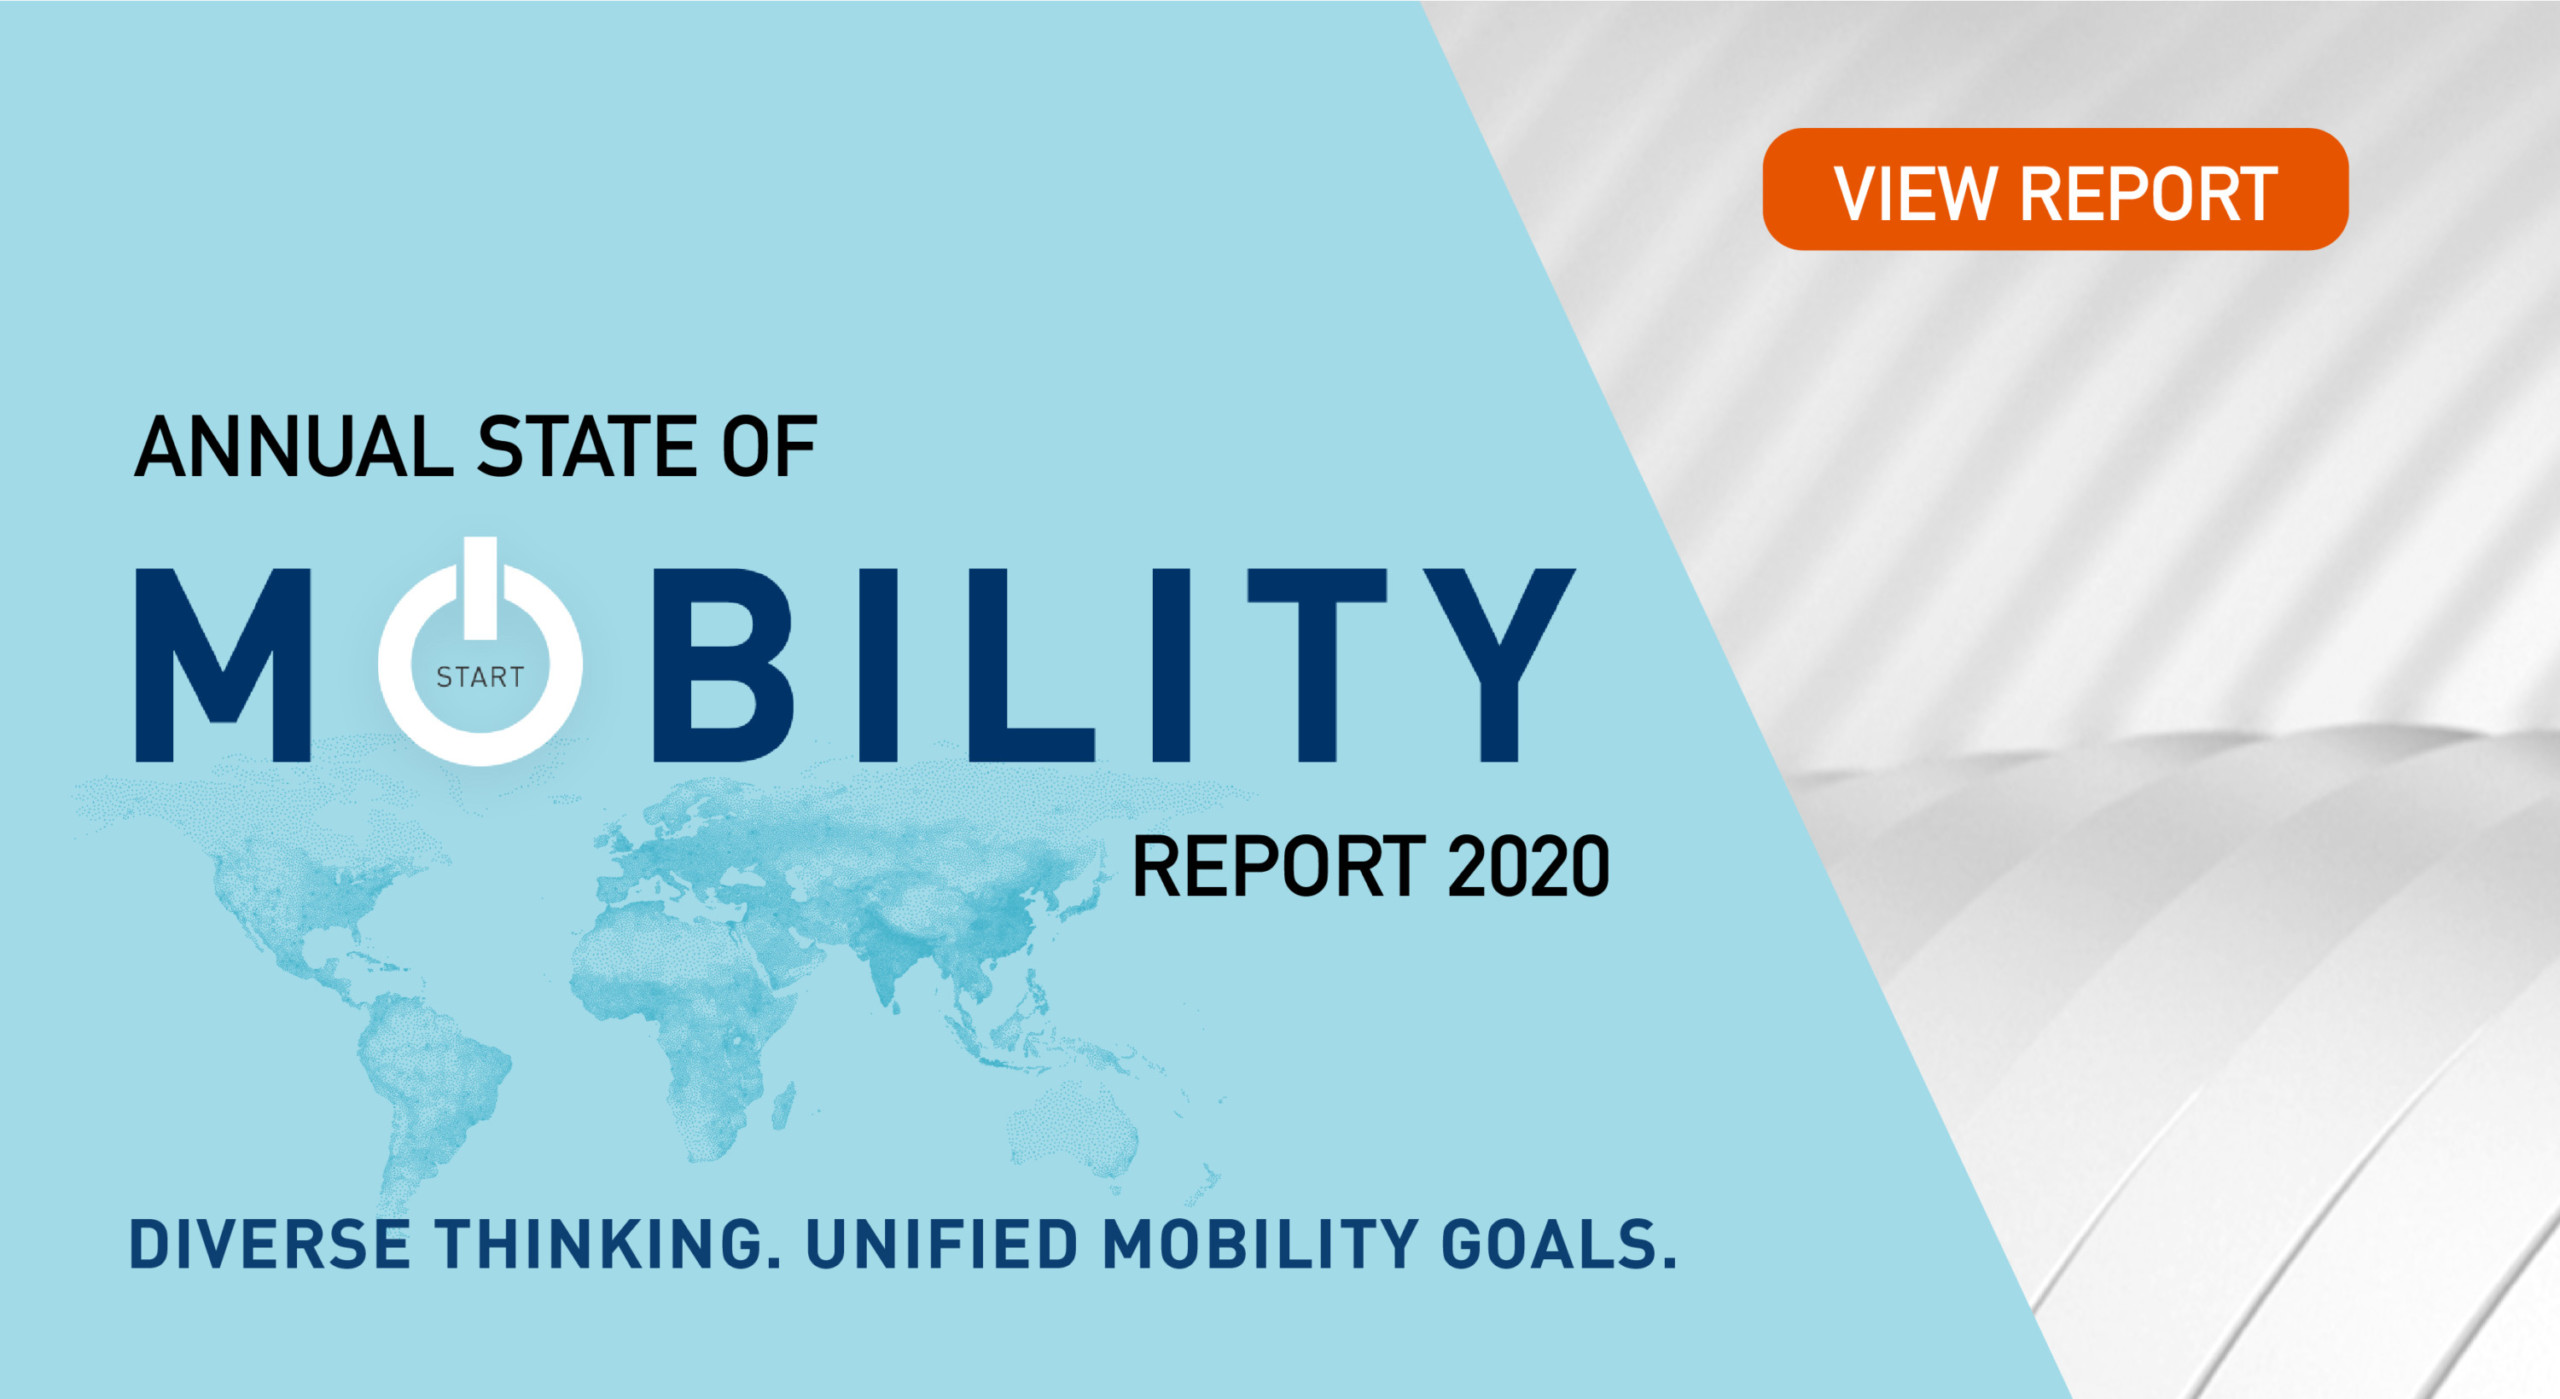 The Annual State of Mobility Report 2020 is here: View the Report